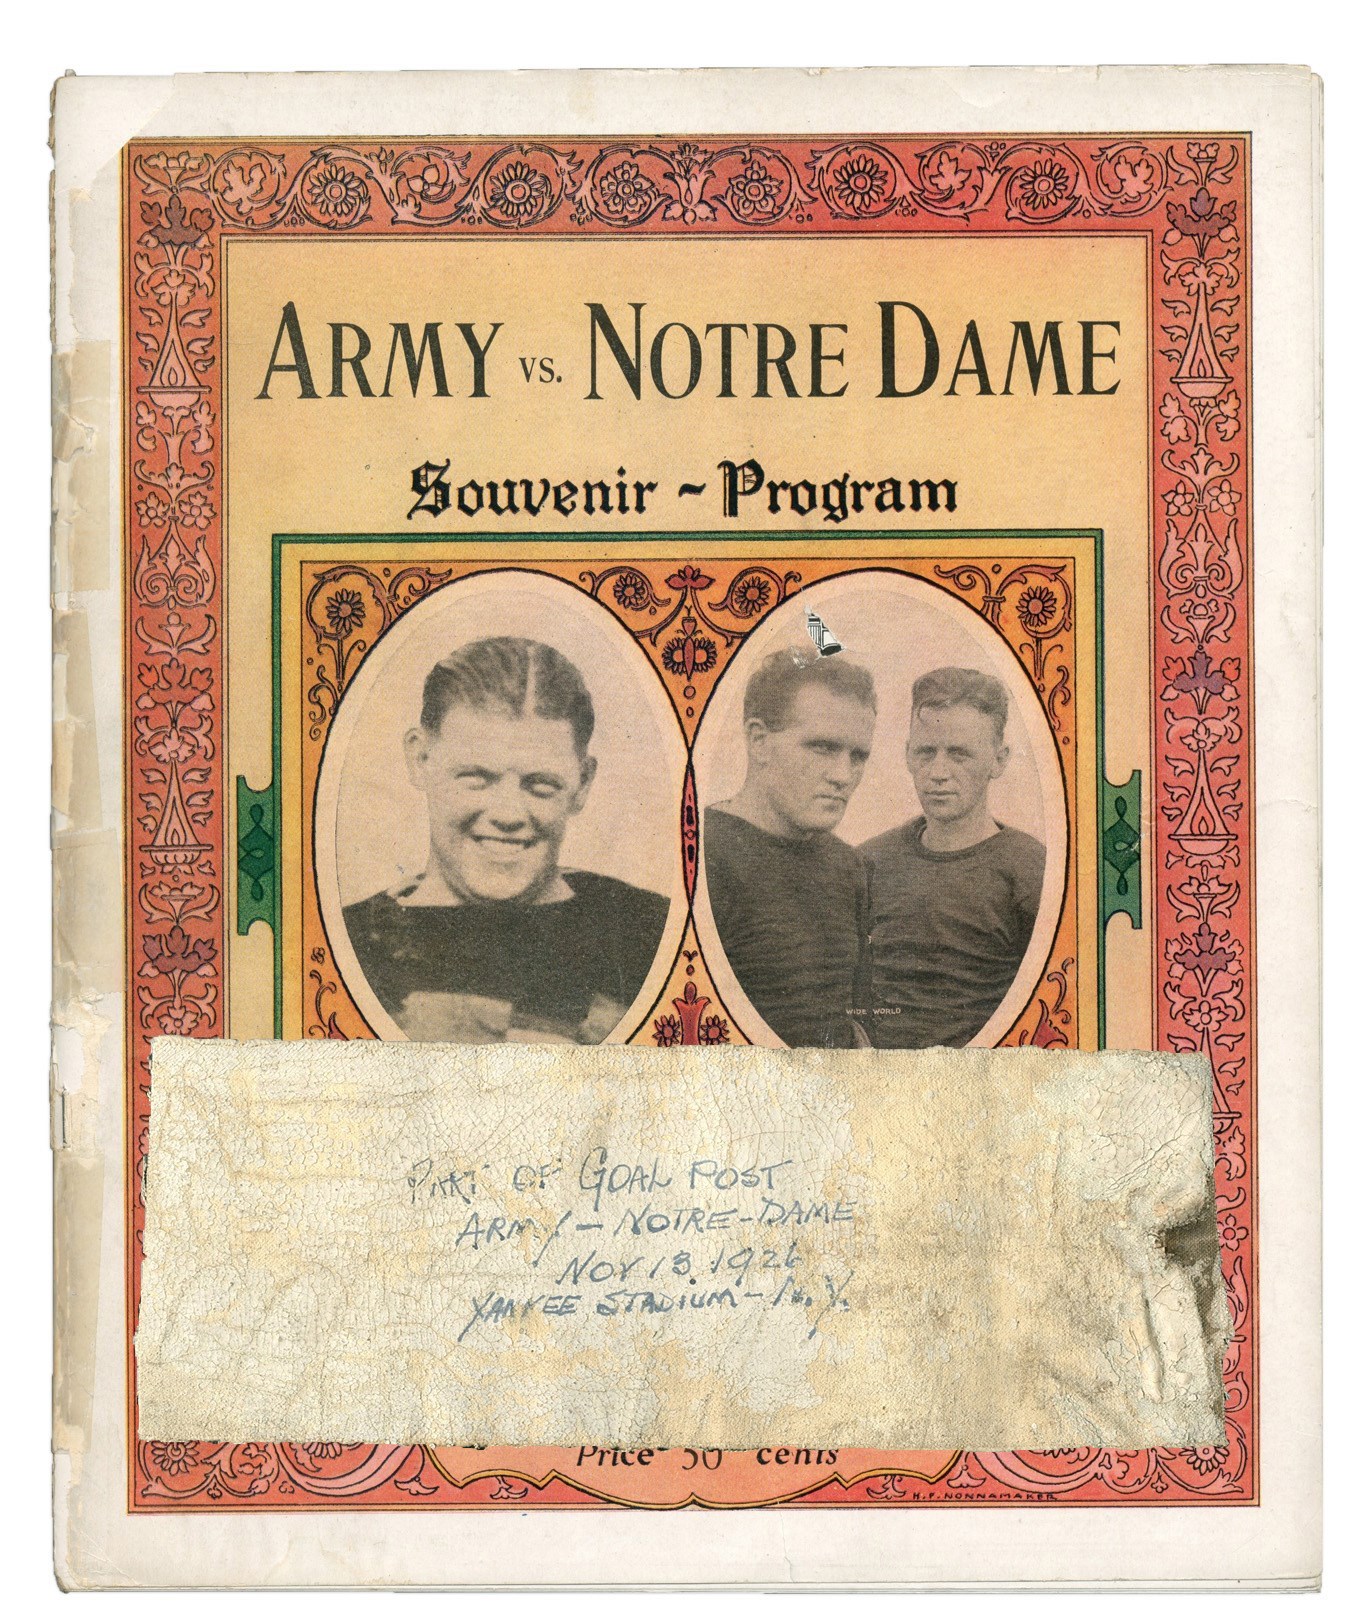 Football - Piece of the Goalpost from One of the Greatest College Football Games Ever Played (1926 Army vs. ND)